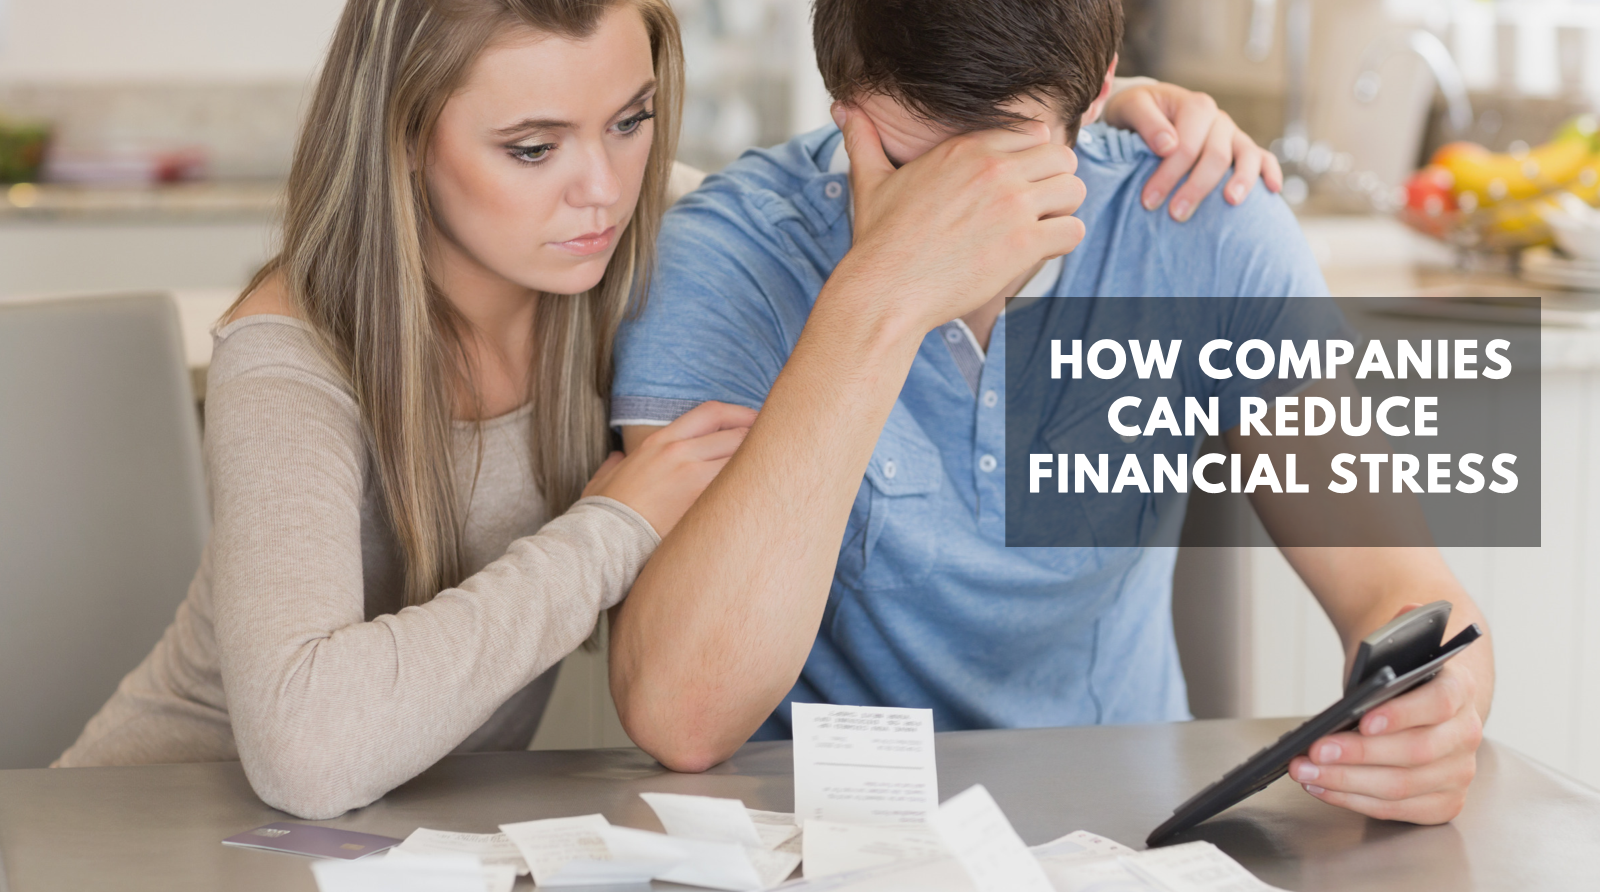 How Companies Can Reduce Financial Stress